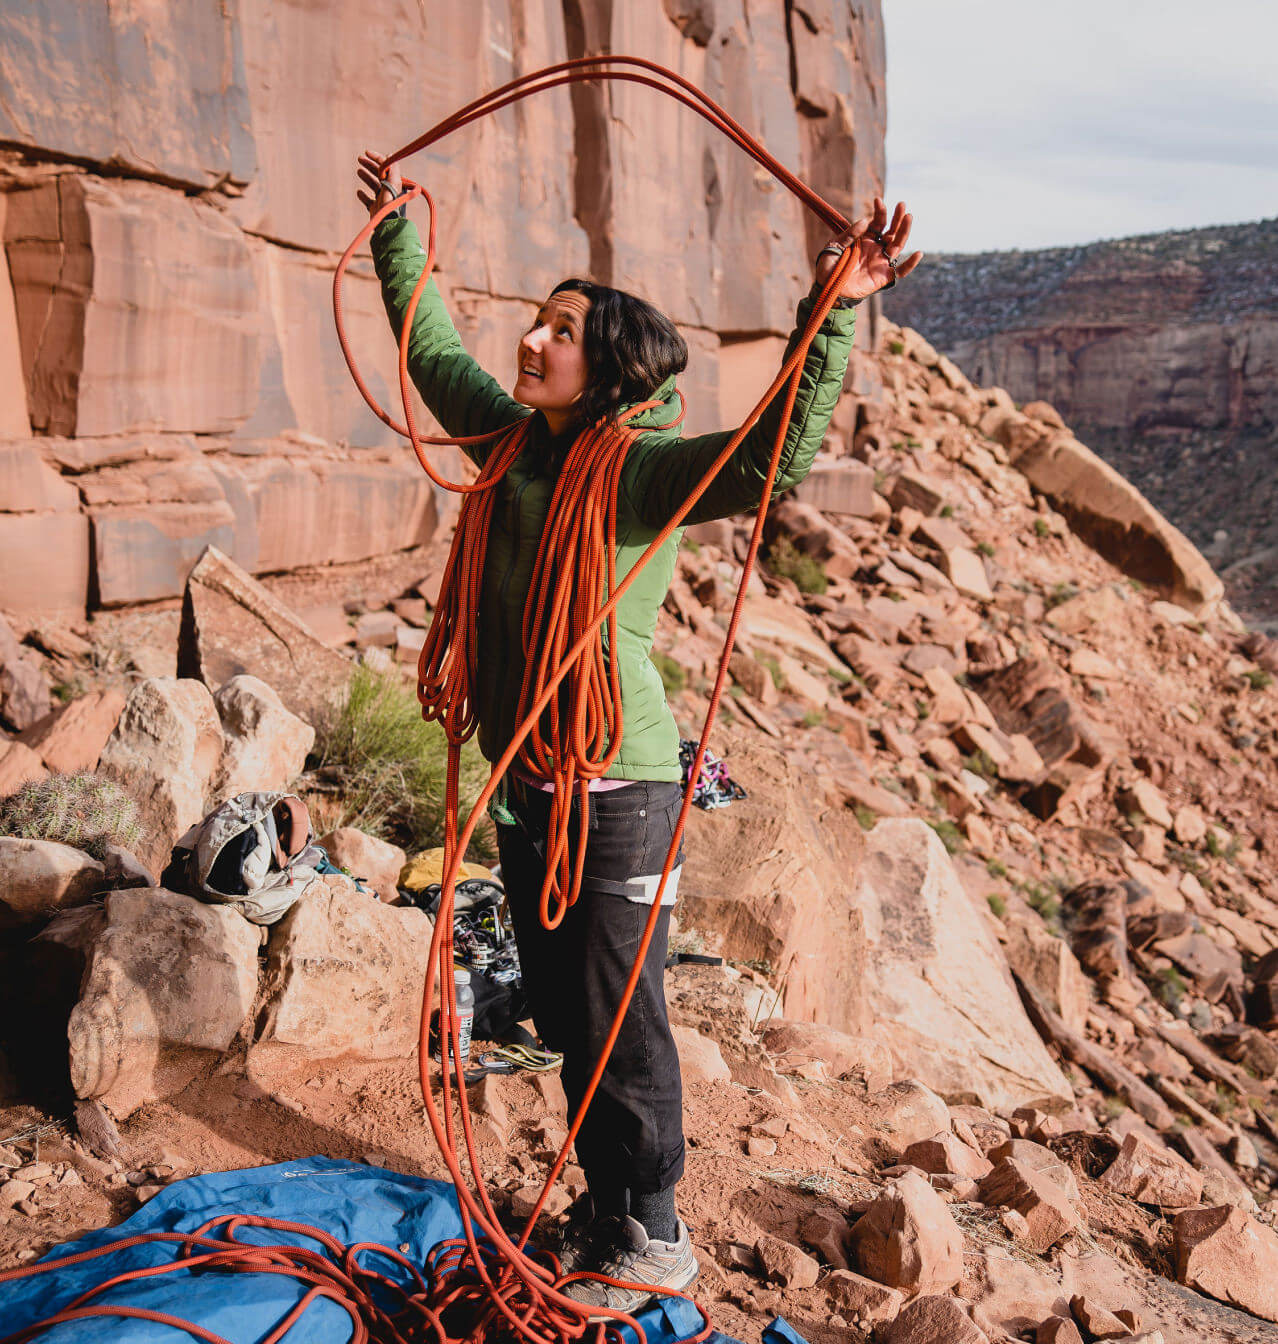 Climber in green jacket with orange rope about to climb in her gear